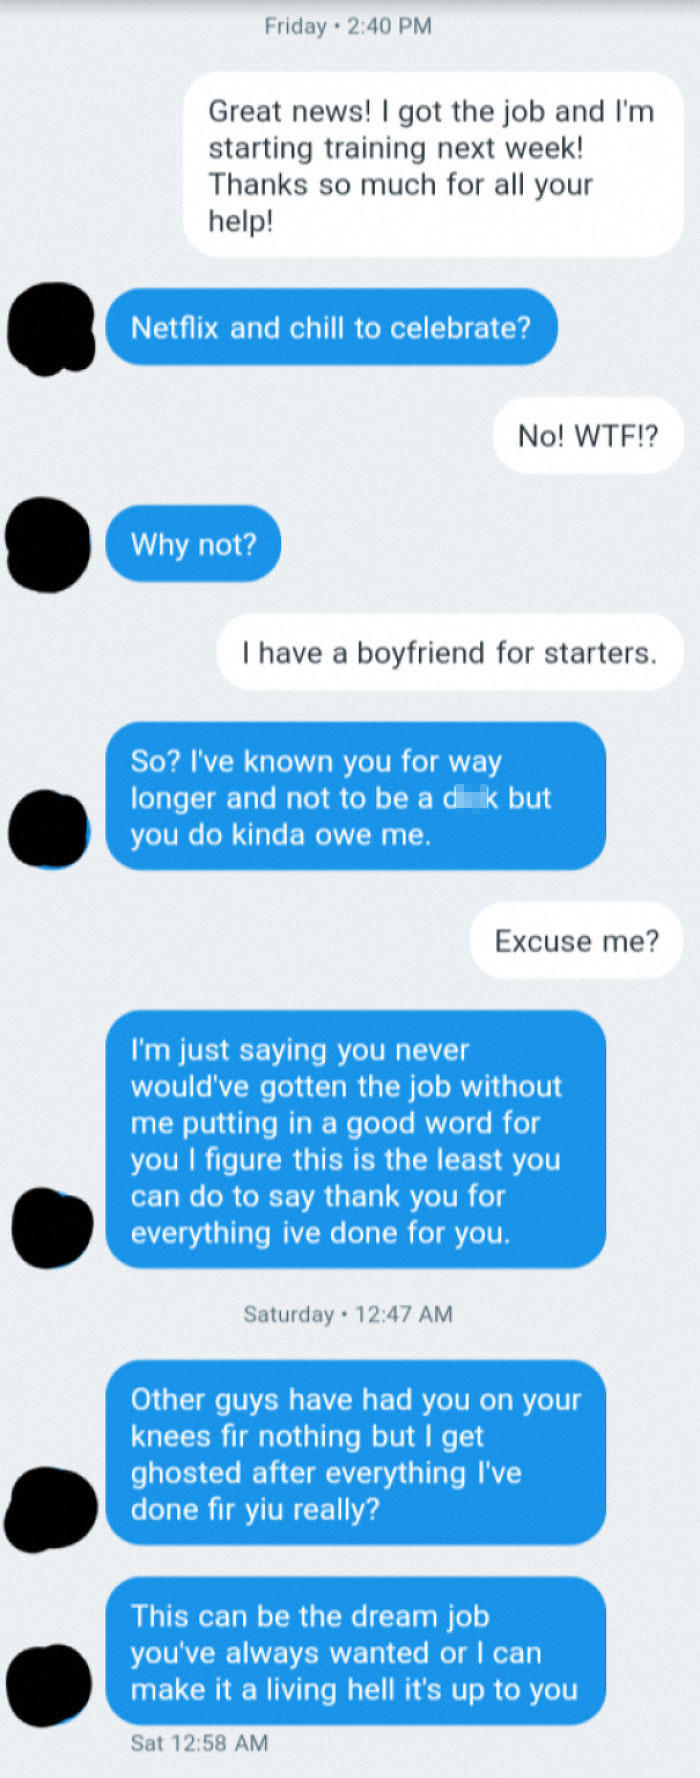 Saw This On Twitter The Other Day And Thought It Fit—nice Guy Expects To "Netflix And Chill" After Helping Woman Get A Job He Recommended